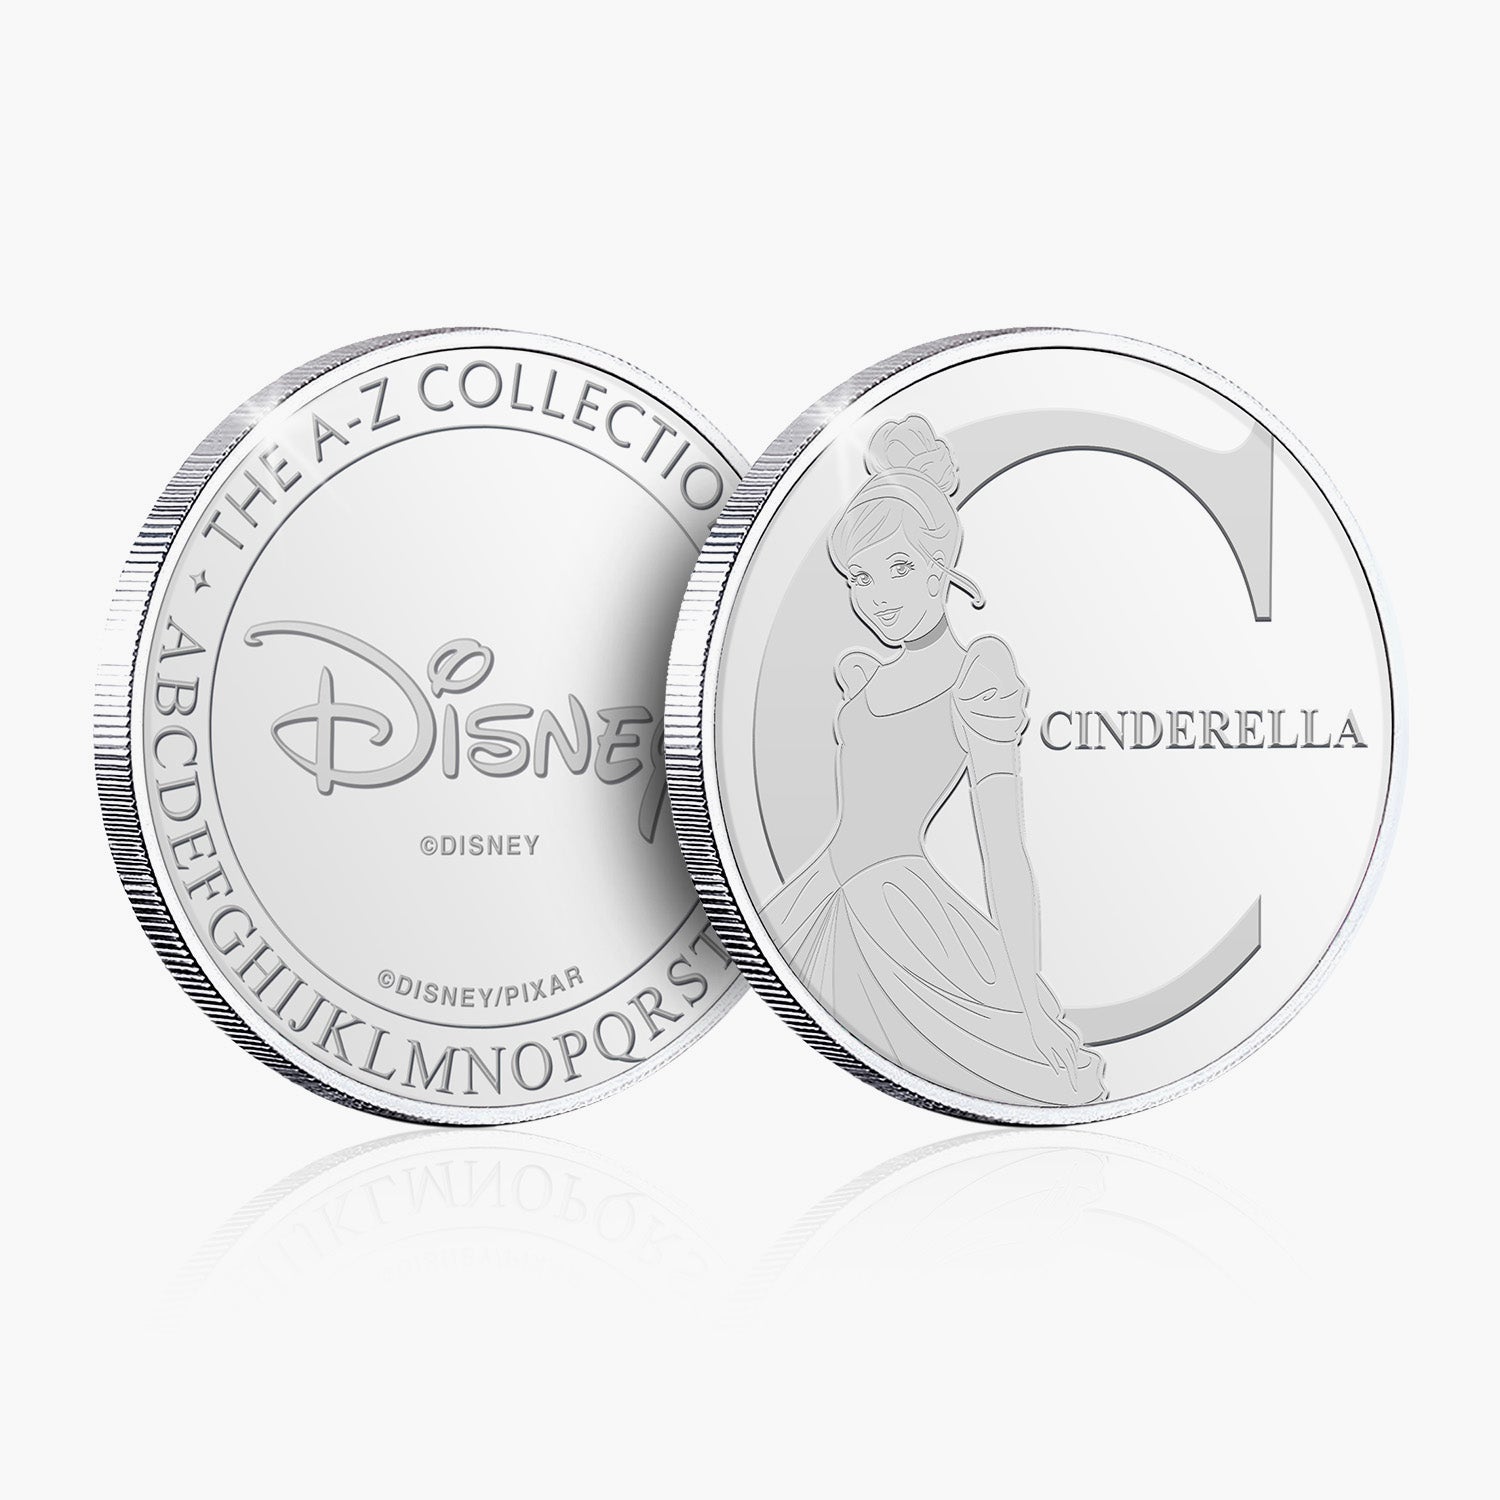 C is for Cinderella Silver-Plated Commemorative